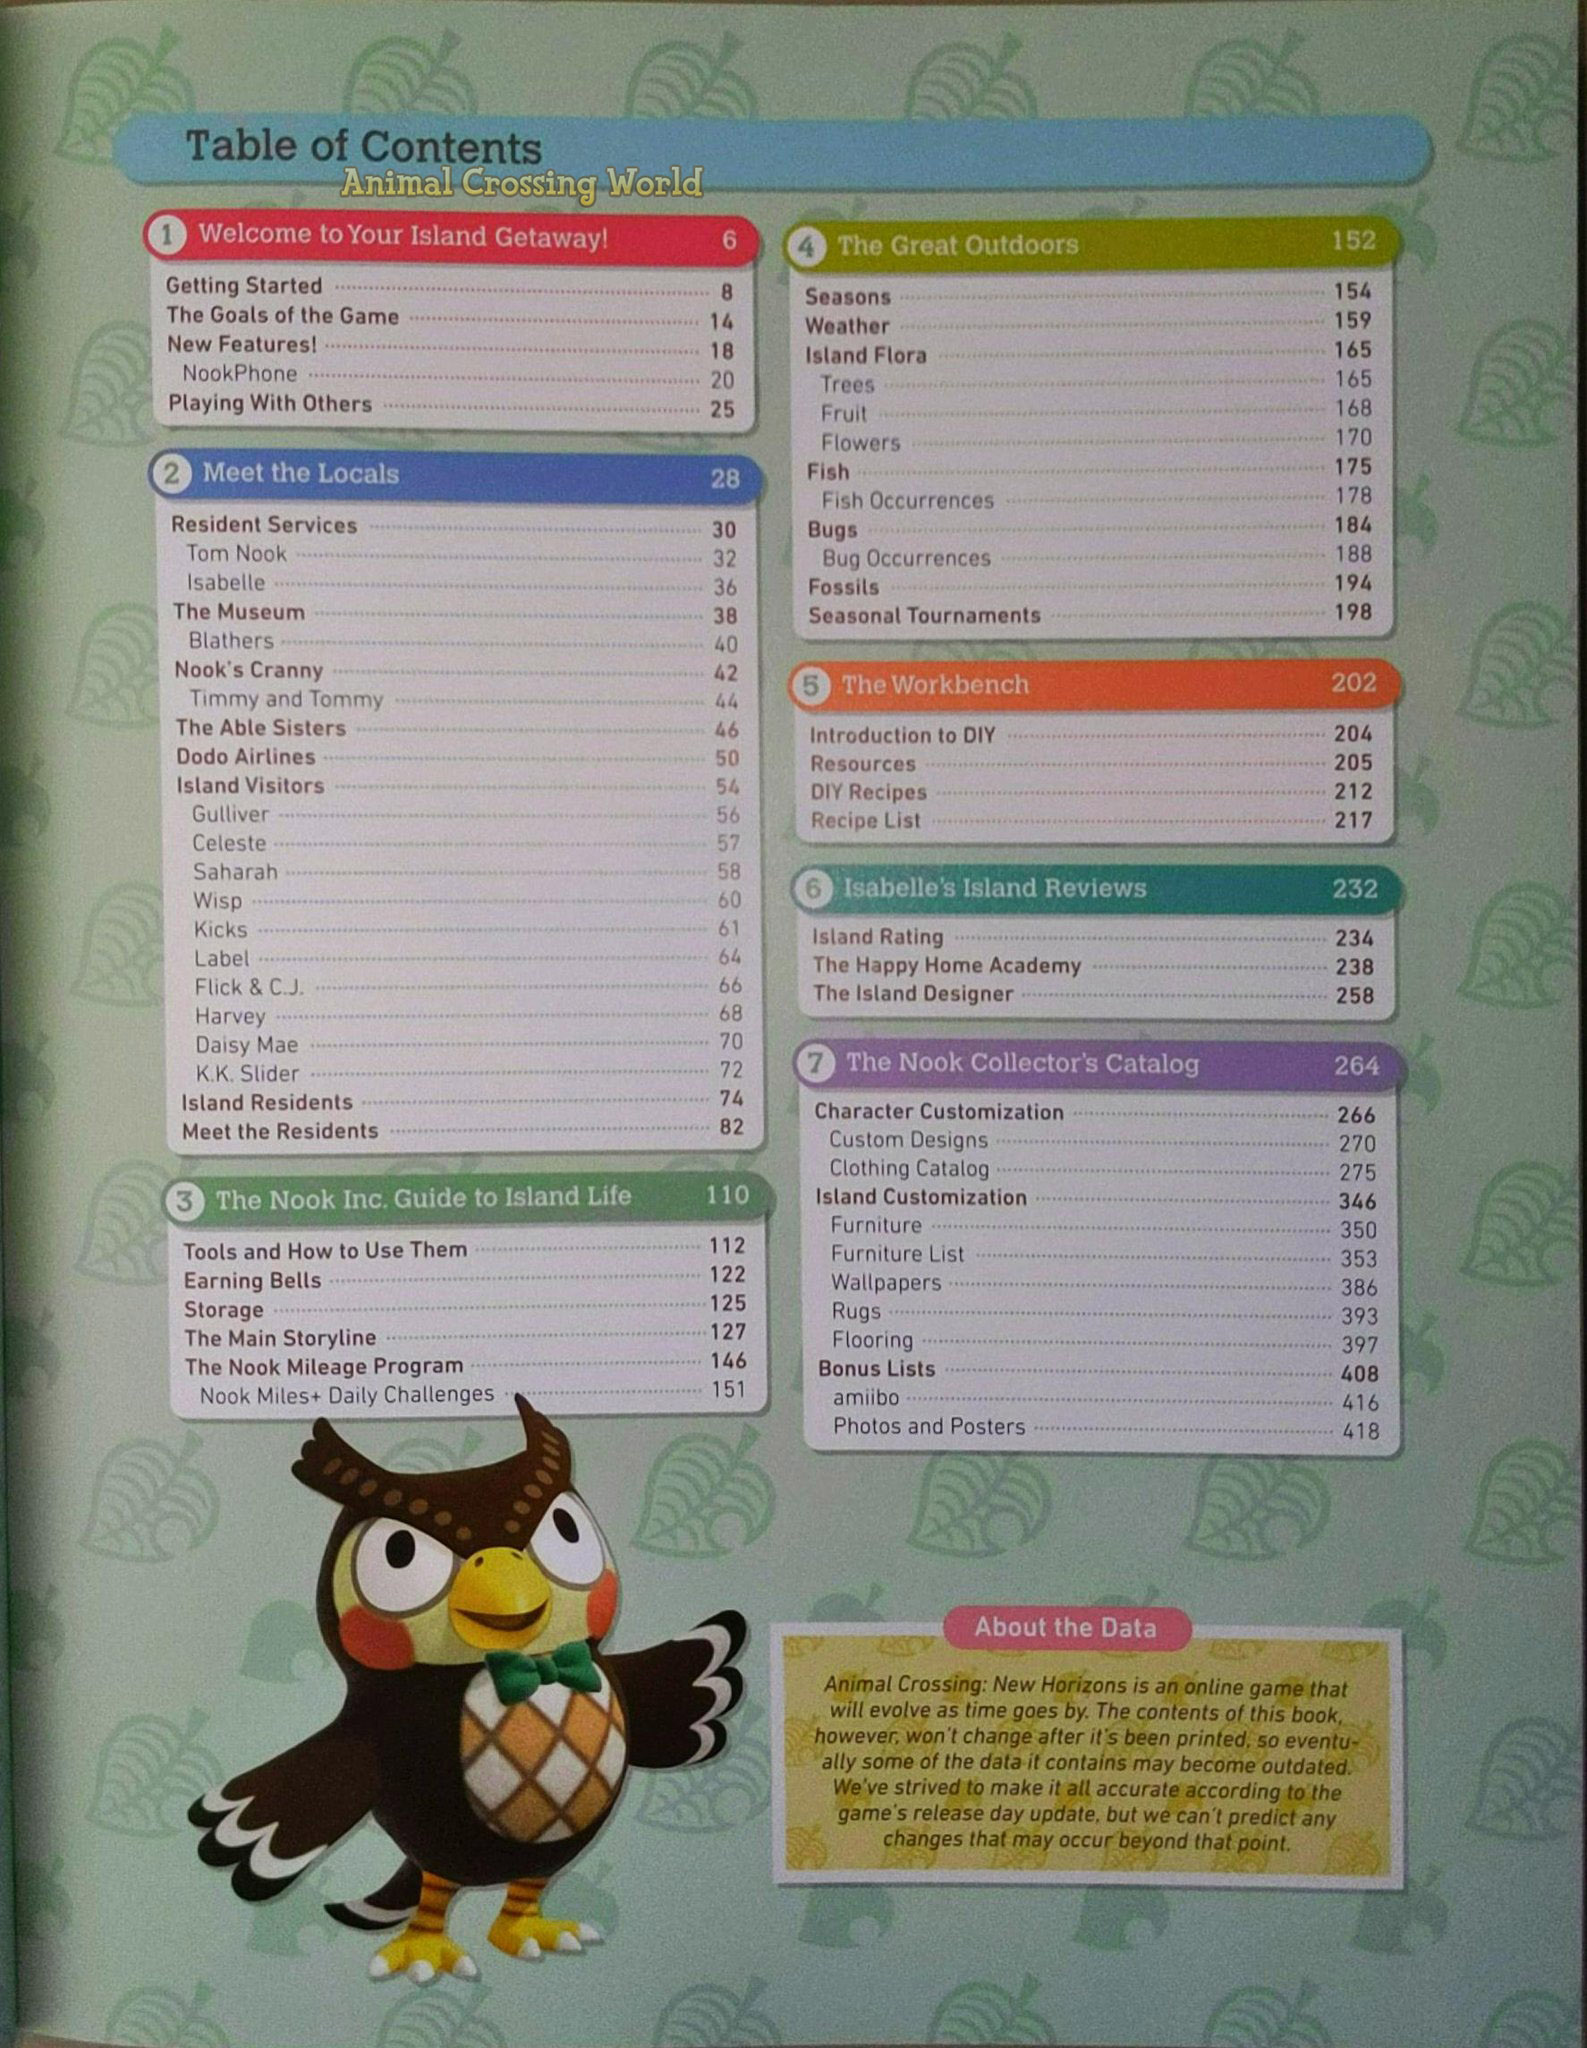 animal crossing new horizons official companion guide digital